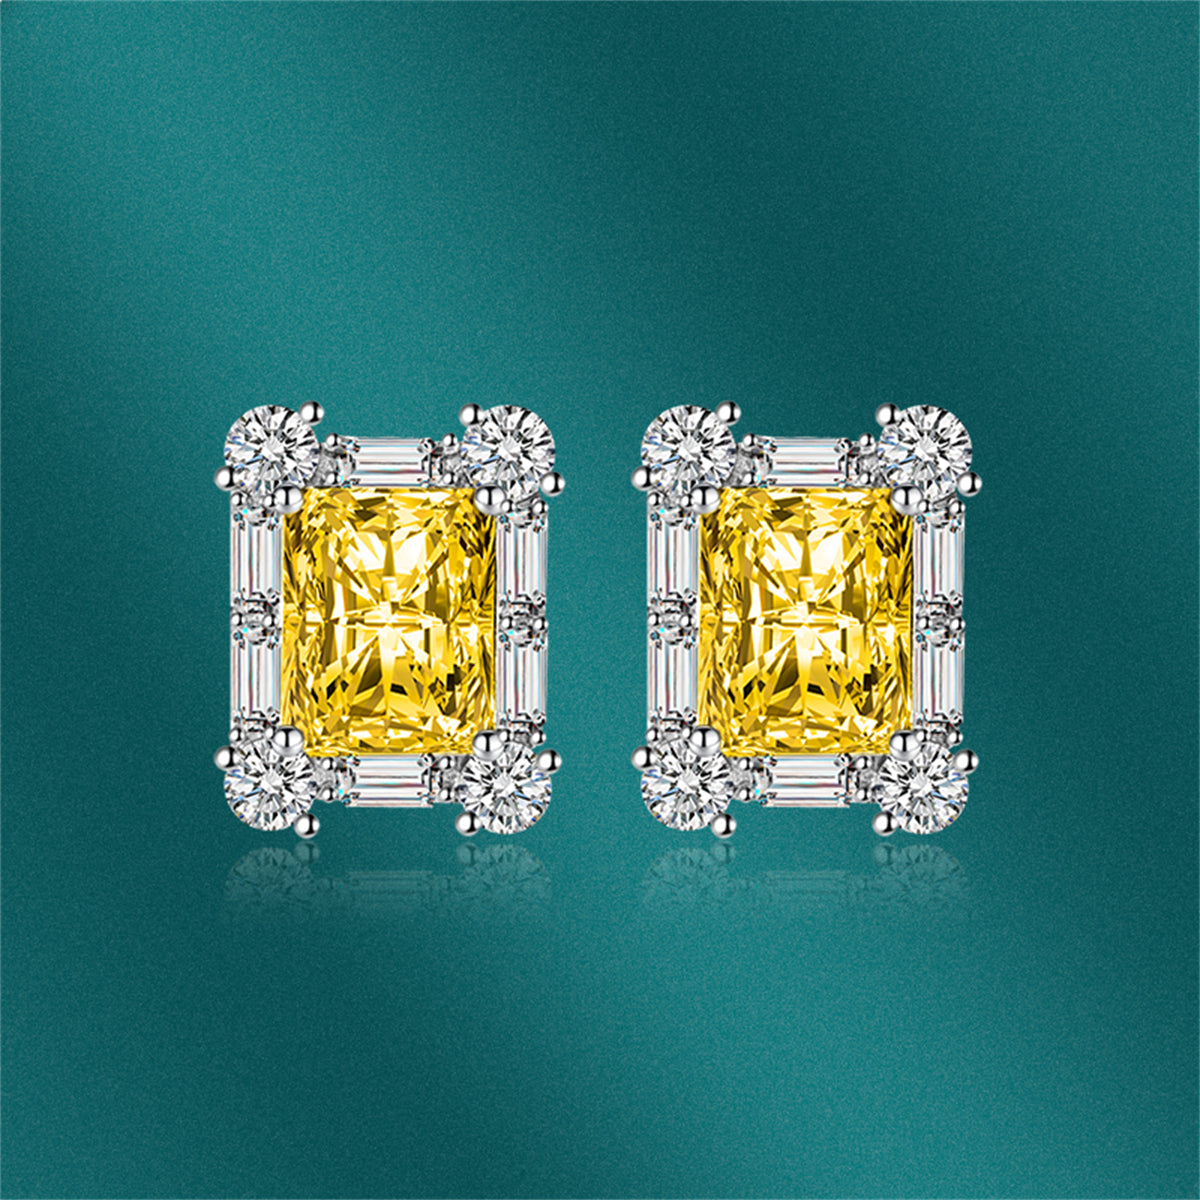 Yellow Crystal & Cubic Zirconia Silver-Plated Rectangular Stud Earrings